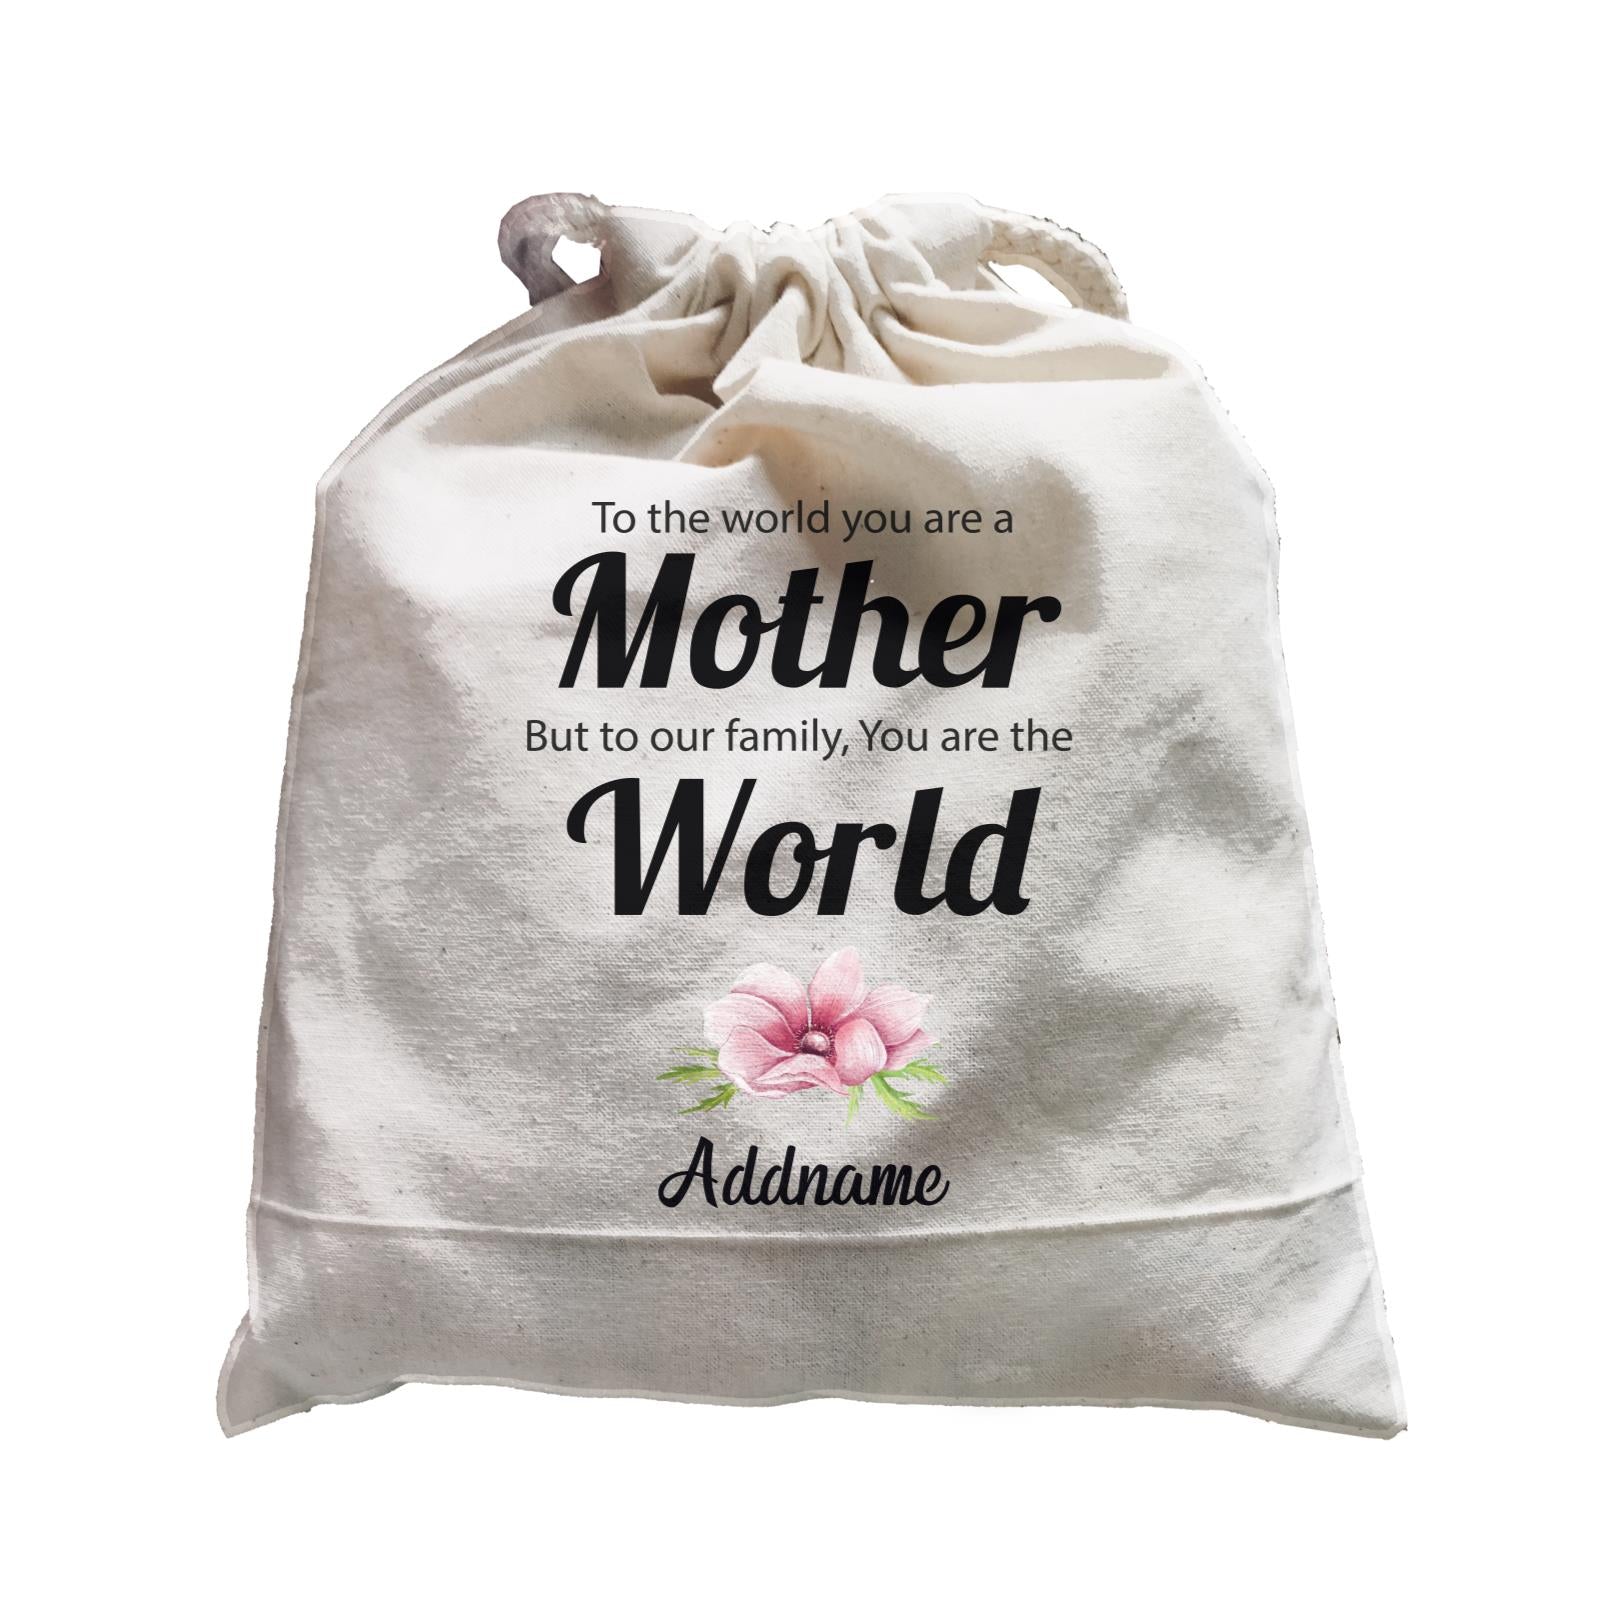 Sweet Mom Quotes 1 To The World You Are A Mother But To Our Family, You Are The World Addname Satchel